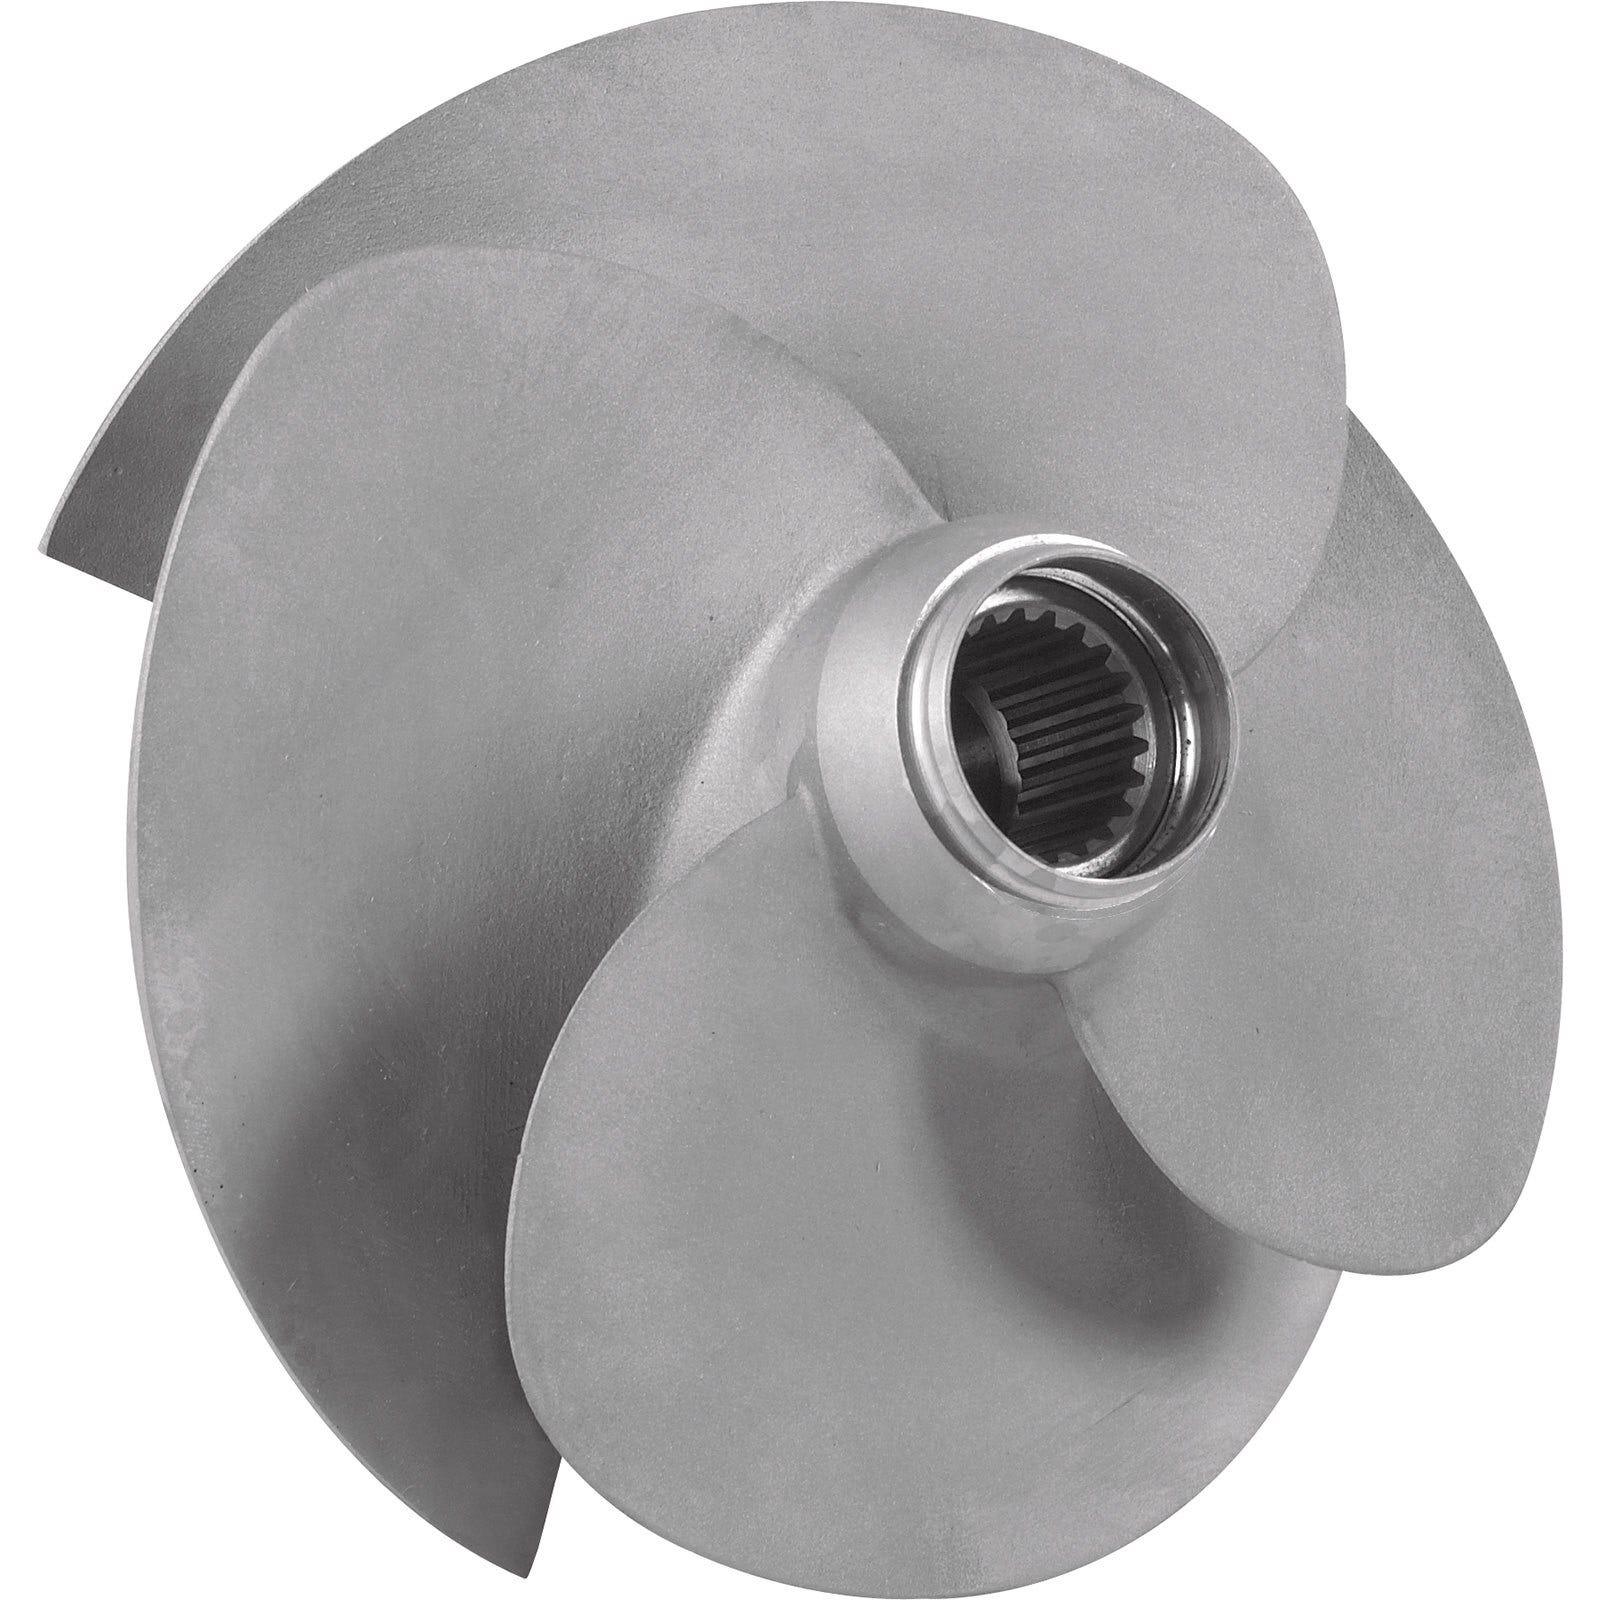 GTI 90 and GTI SE 90 (2017-2019), GTS 90 (2017-2018) Impeller - Factory Recreation